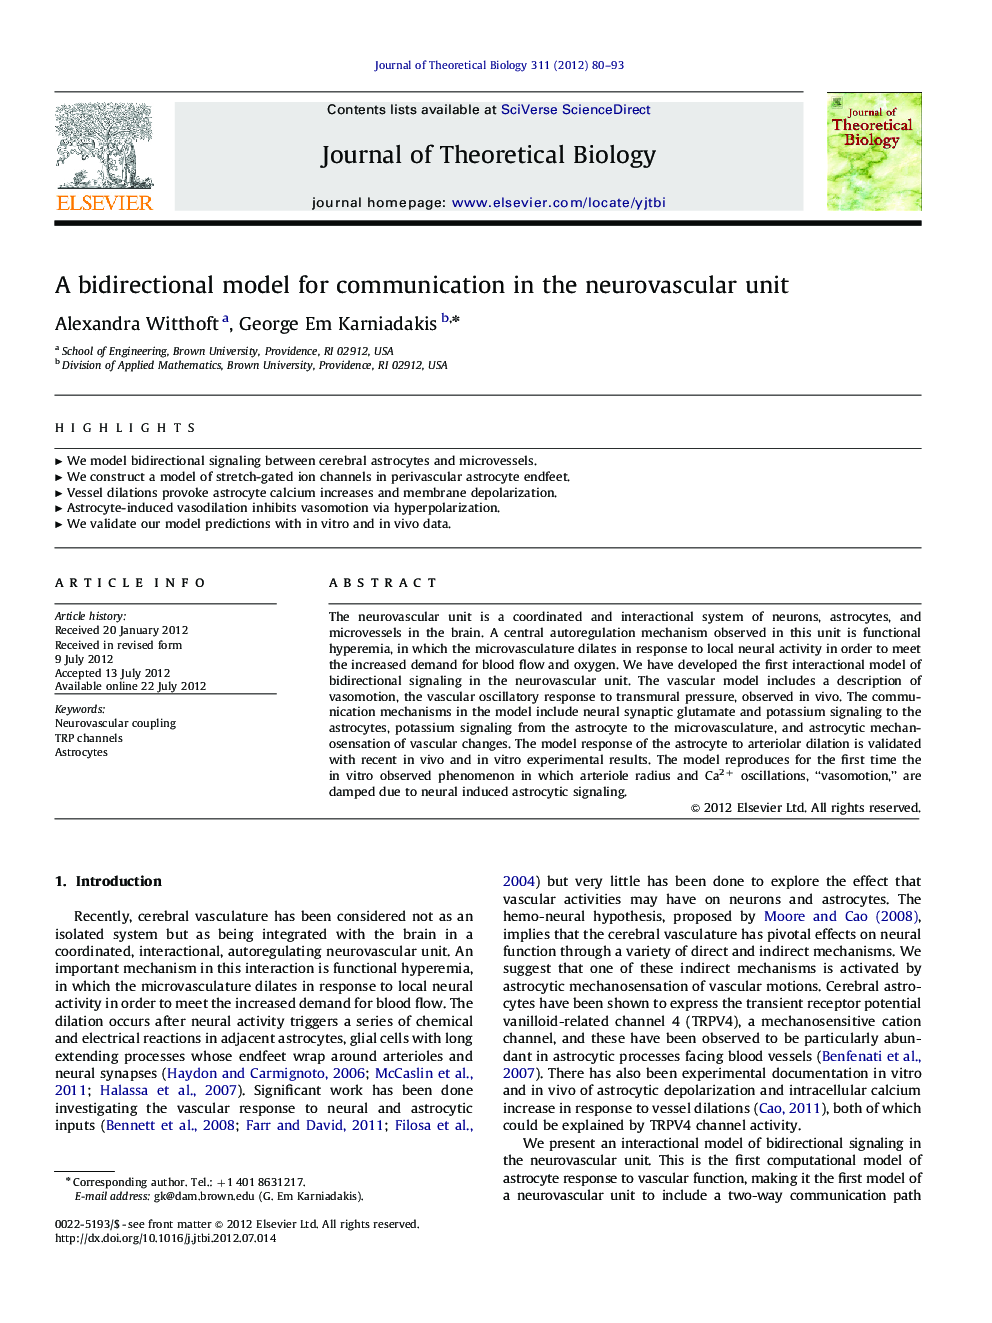 A bidirectional model for communication in the neurovascular unit